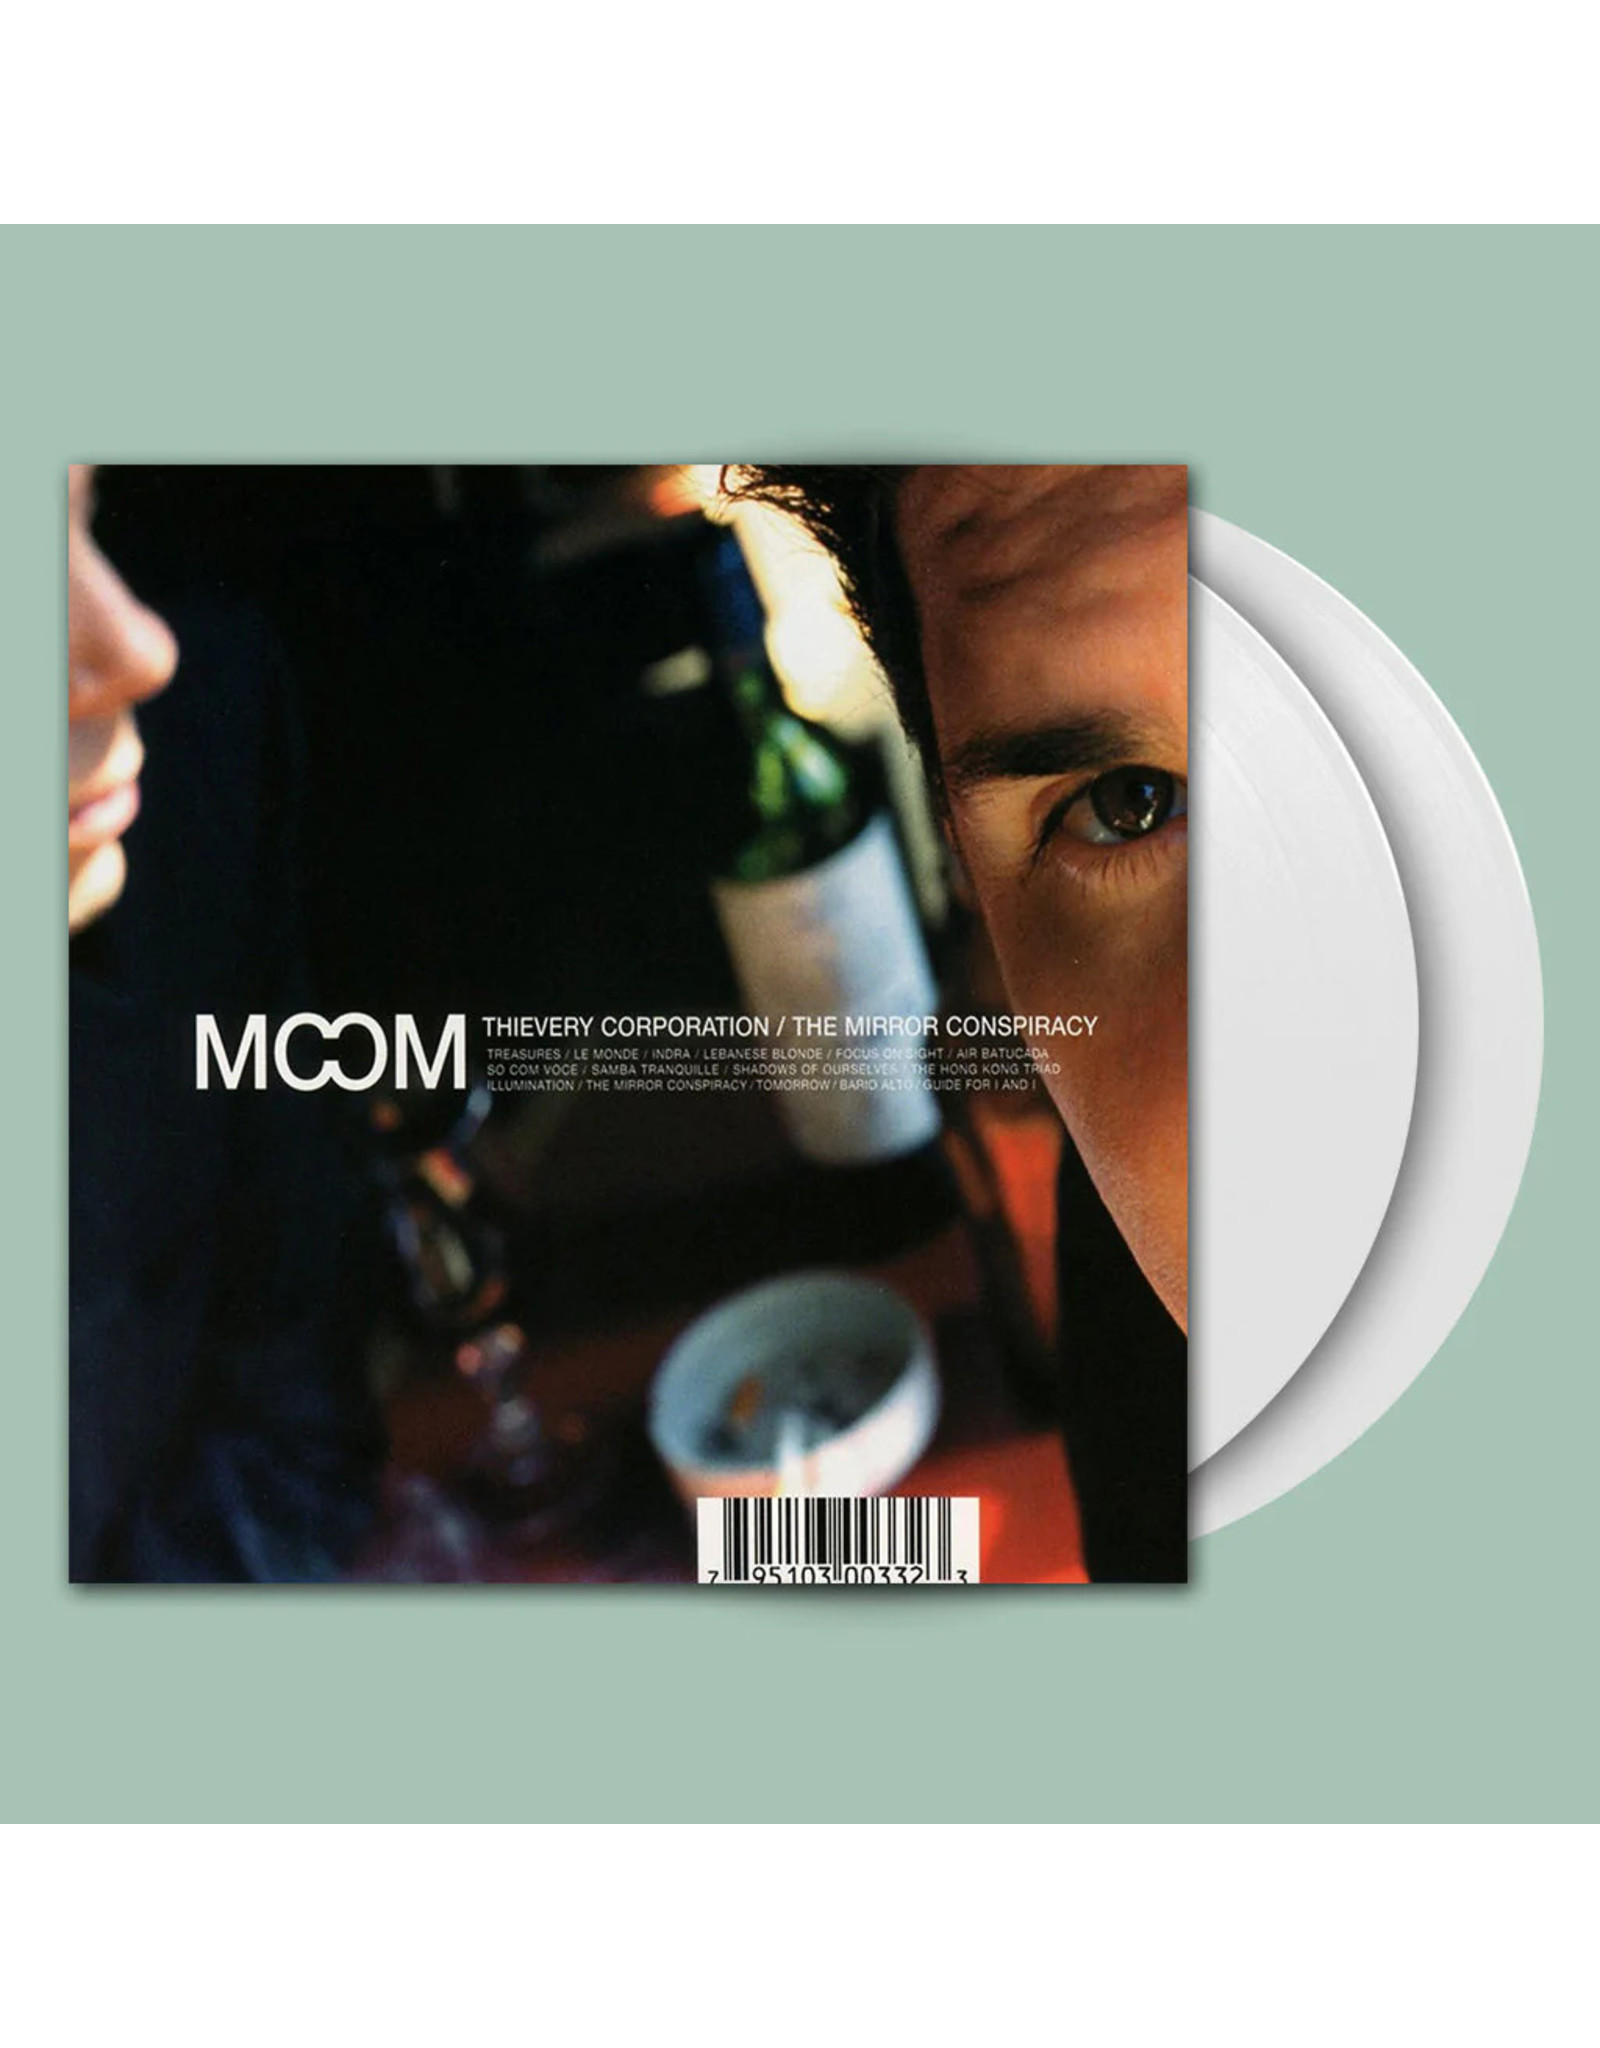 Thievery Corporation - The Mirror Conspiracy (Exclusive White Vinyl)